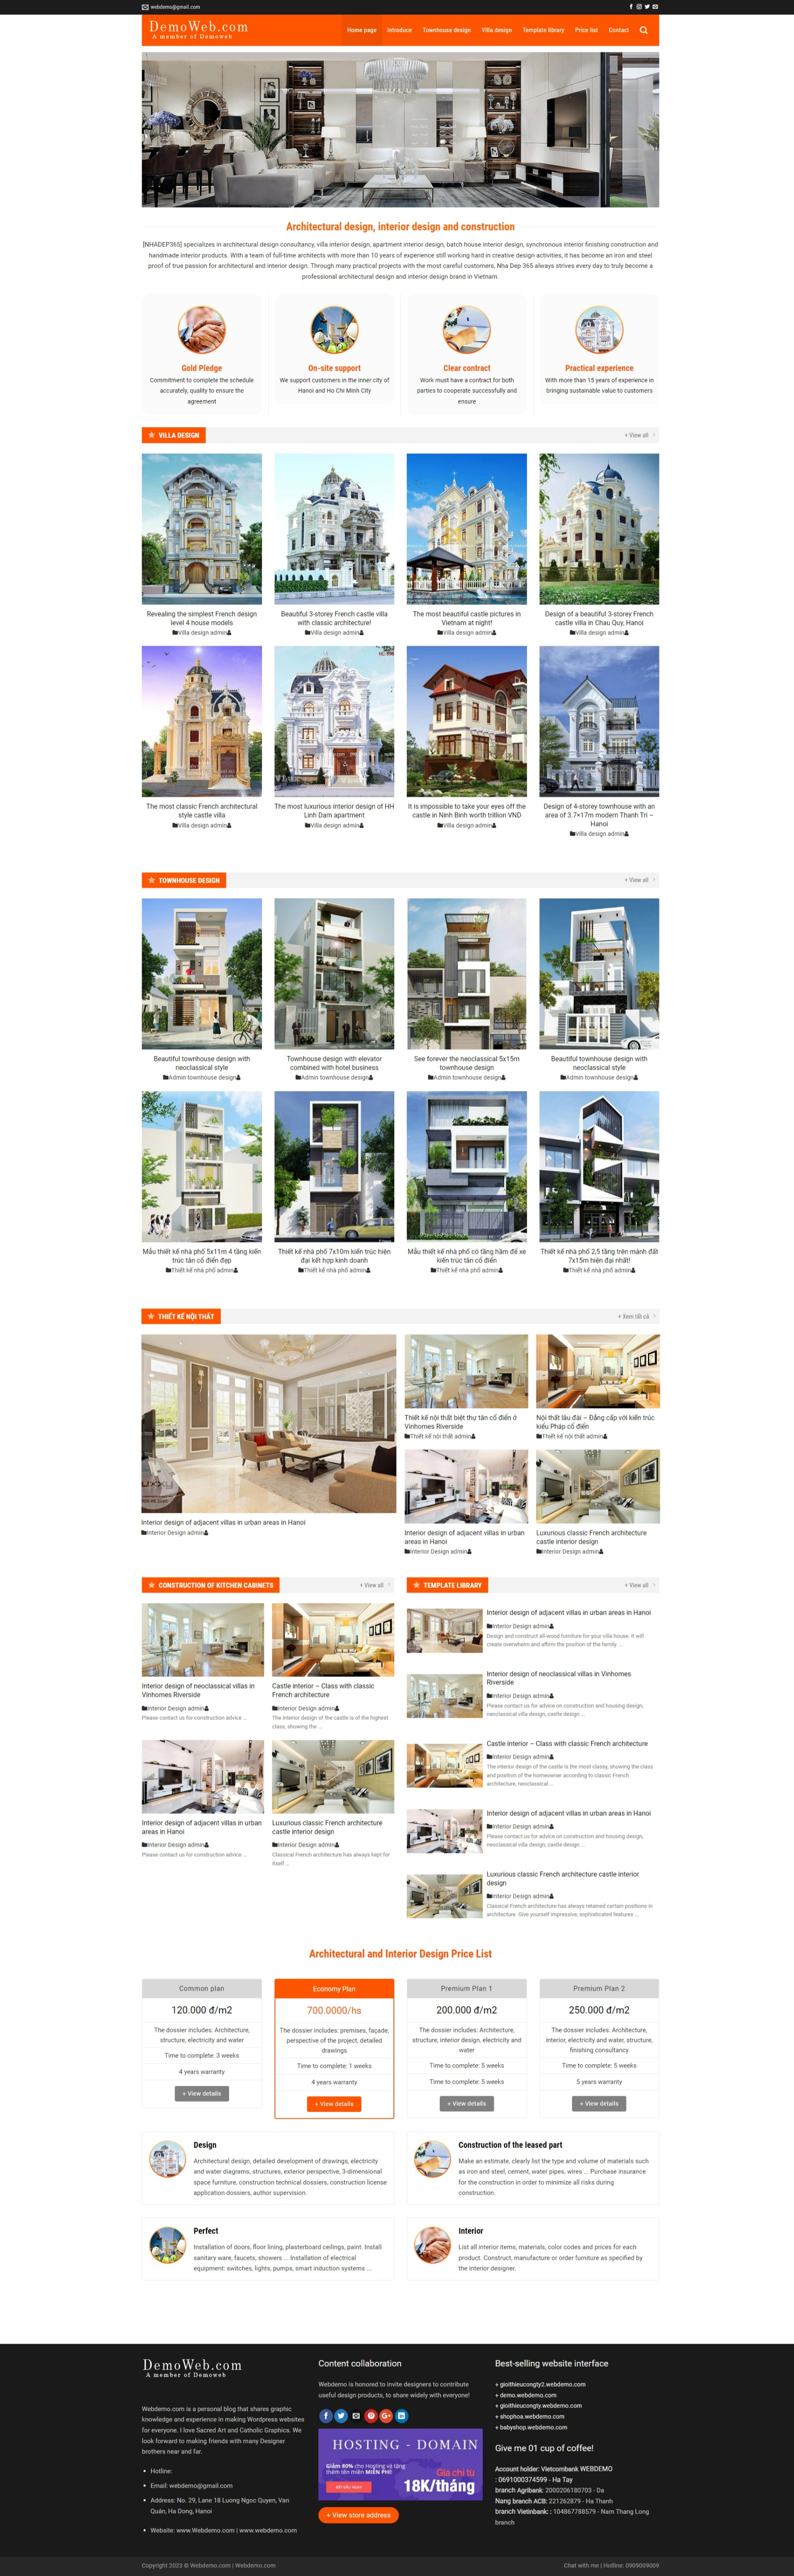 Website introducing architectural design company with wordpress